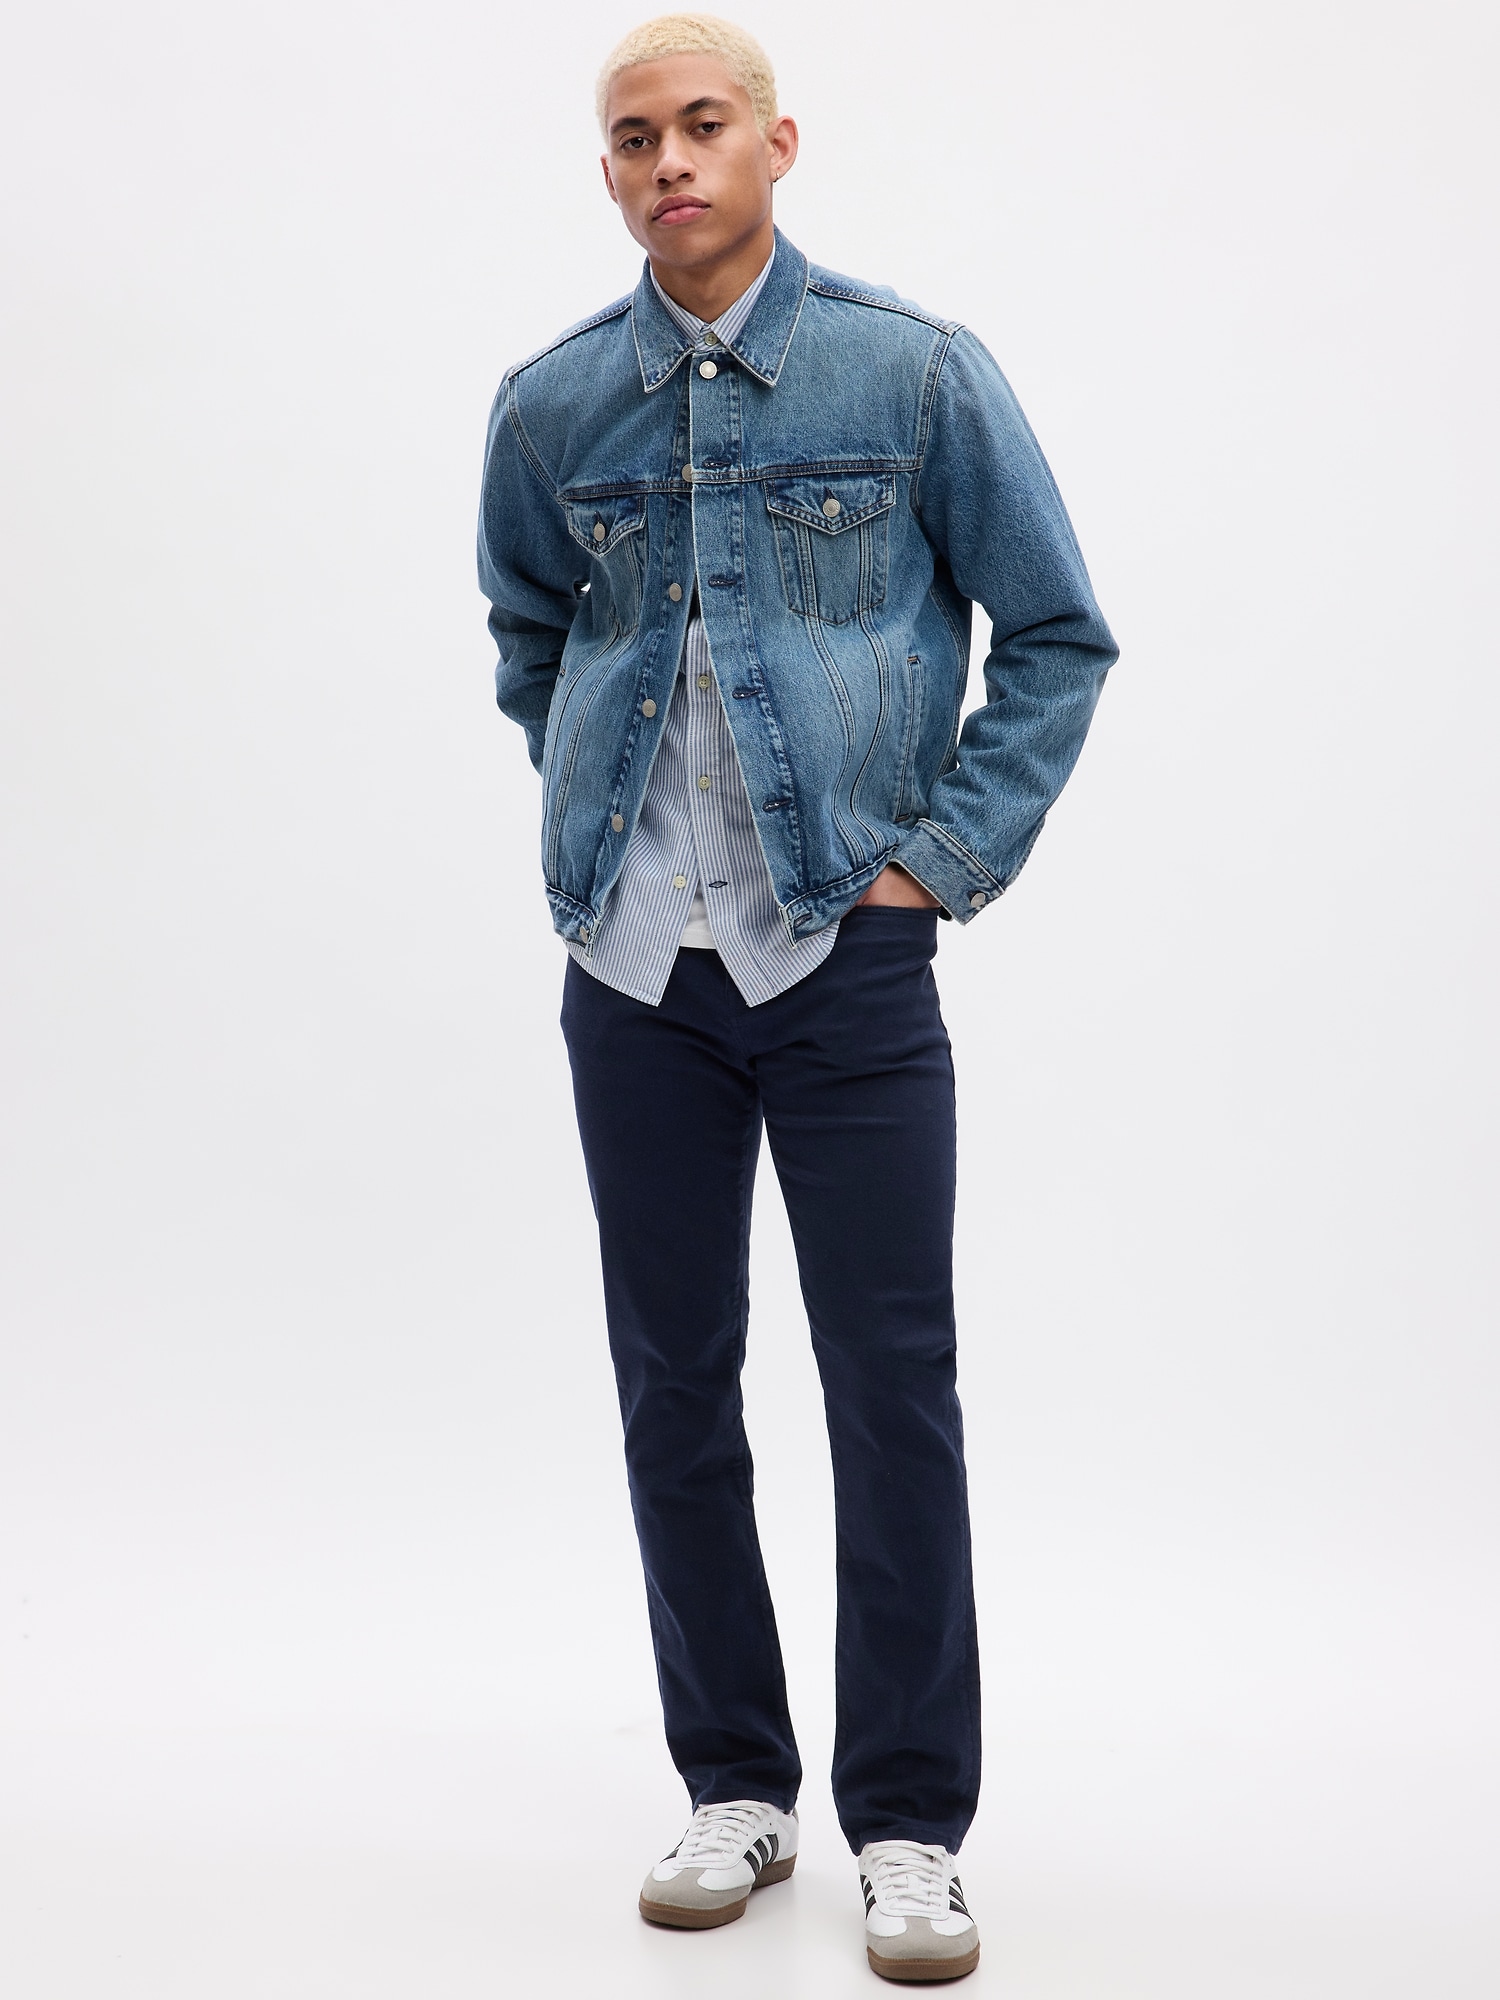 City Jeans in Slim Fit with GapFlex Max | Gap